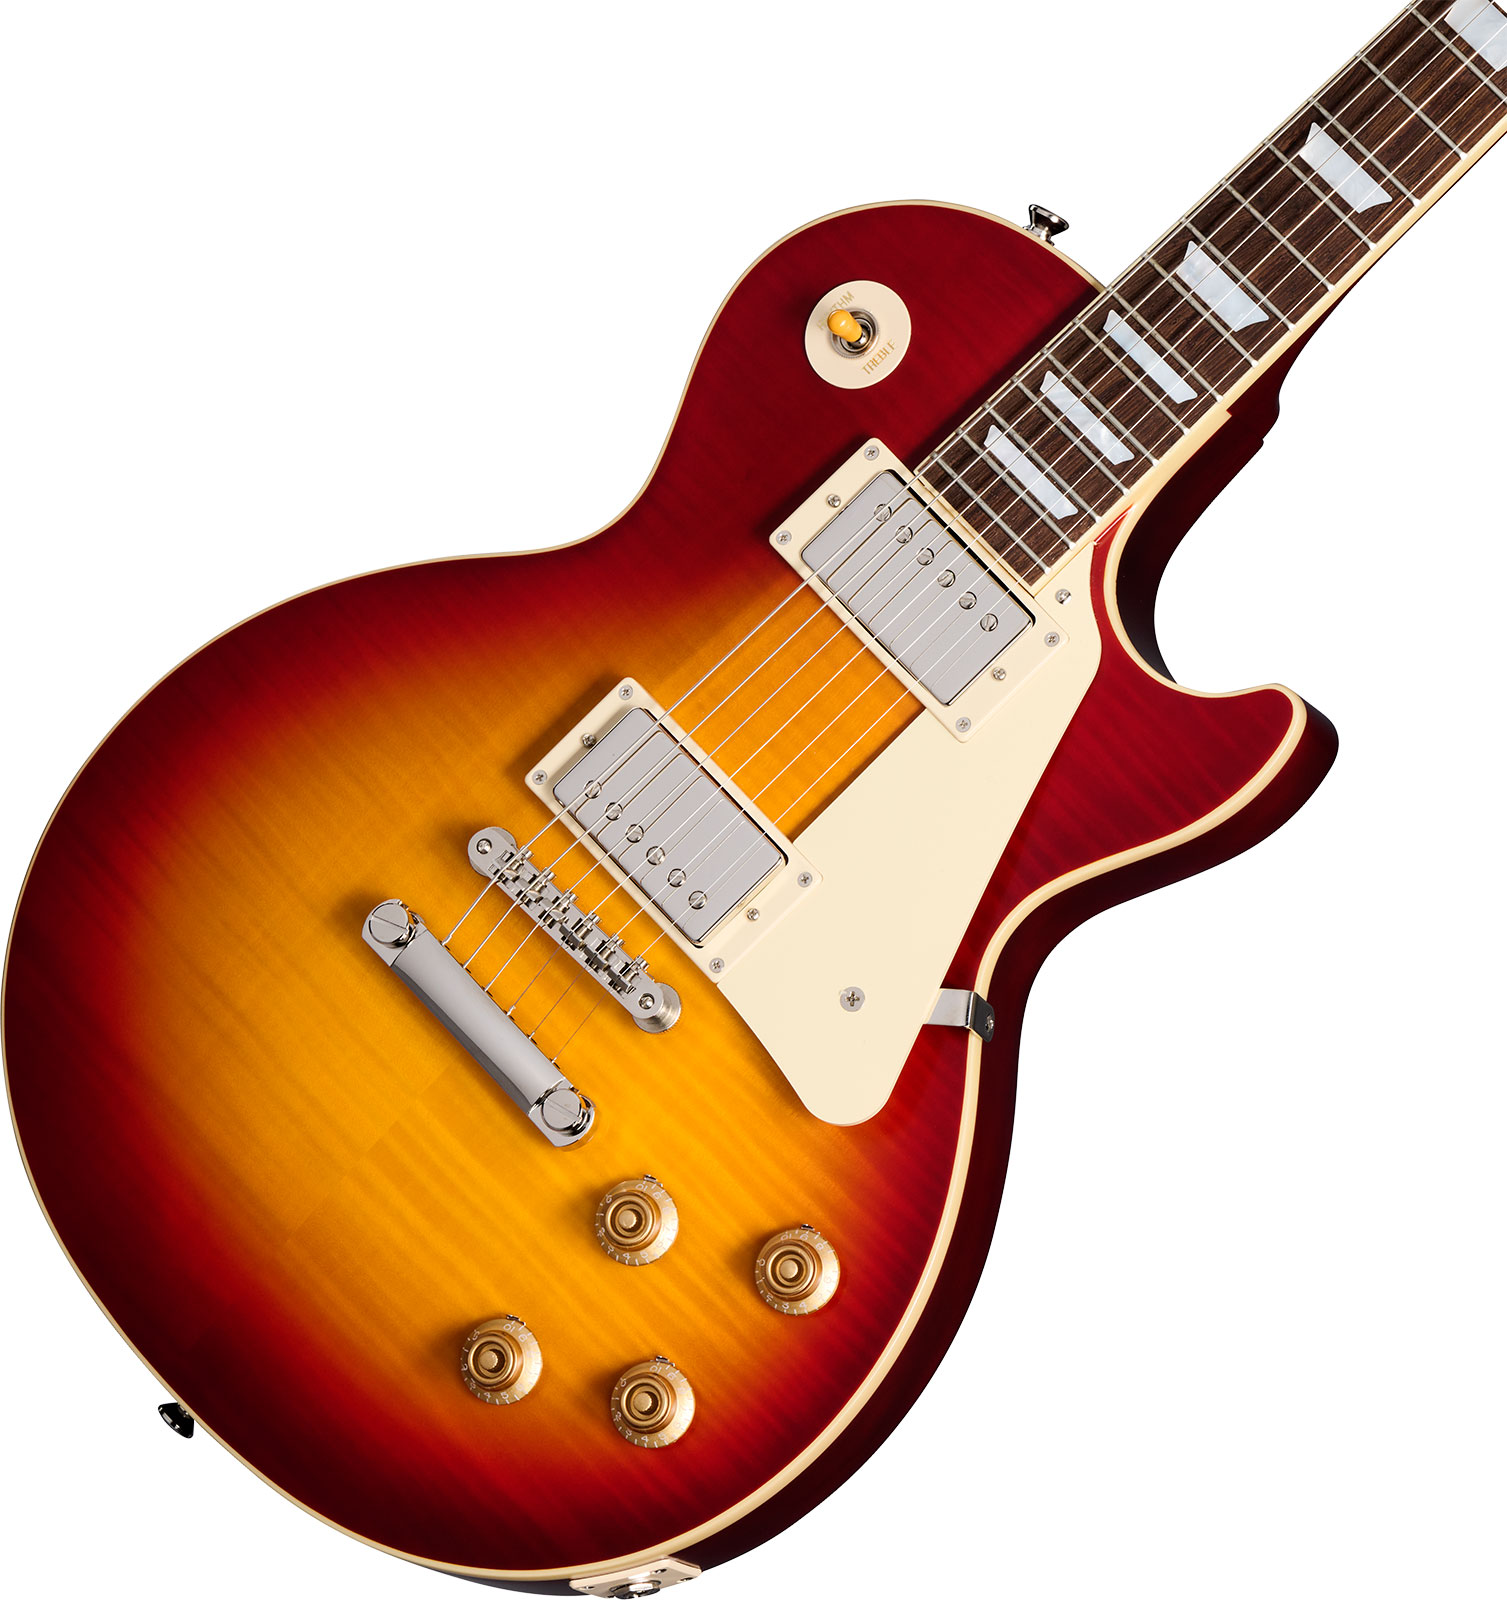 Epiphone 1959 Les Paul Standard Inspired By 2h Gibson Ht Lau - Vos Factory Burst - Single cut electric guitar - Variation 3